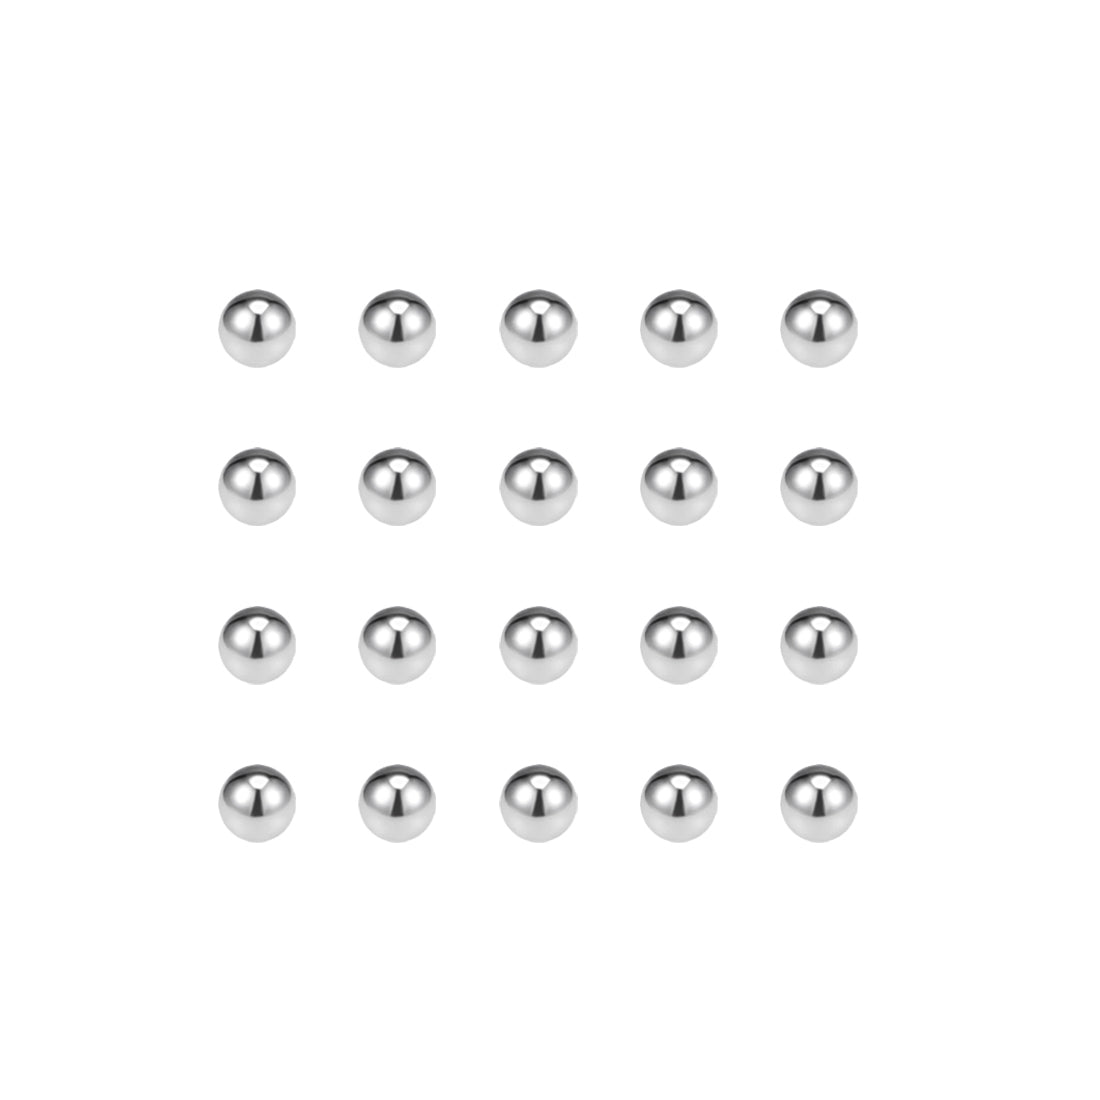 uxcell Uxcell Bearing Balls Metric 304 Stainless Steel G100 Precision Balls Hardware